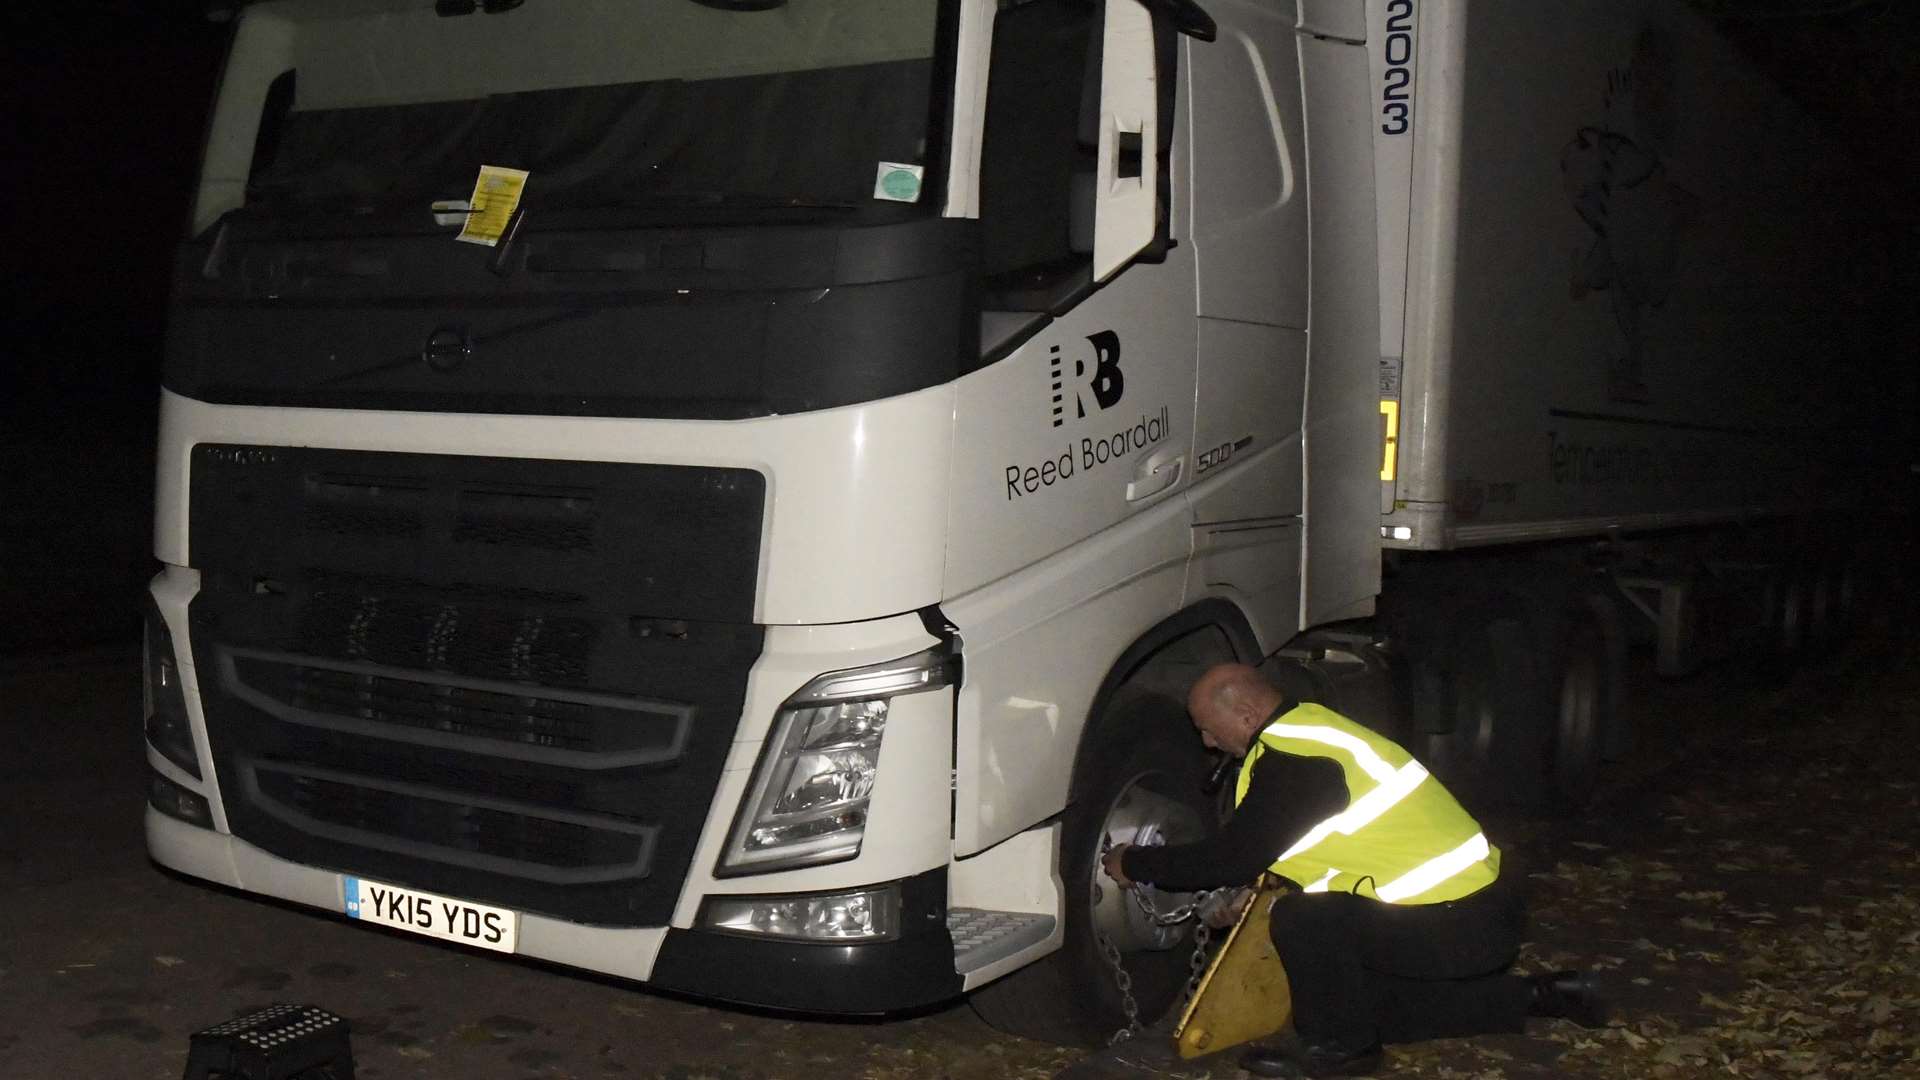 Drivers have to pay a £250 fine to get the clamp released. Picture: Barry Goodwin